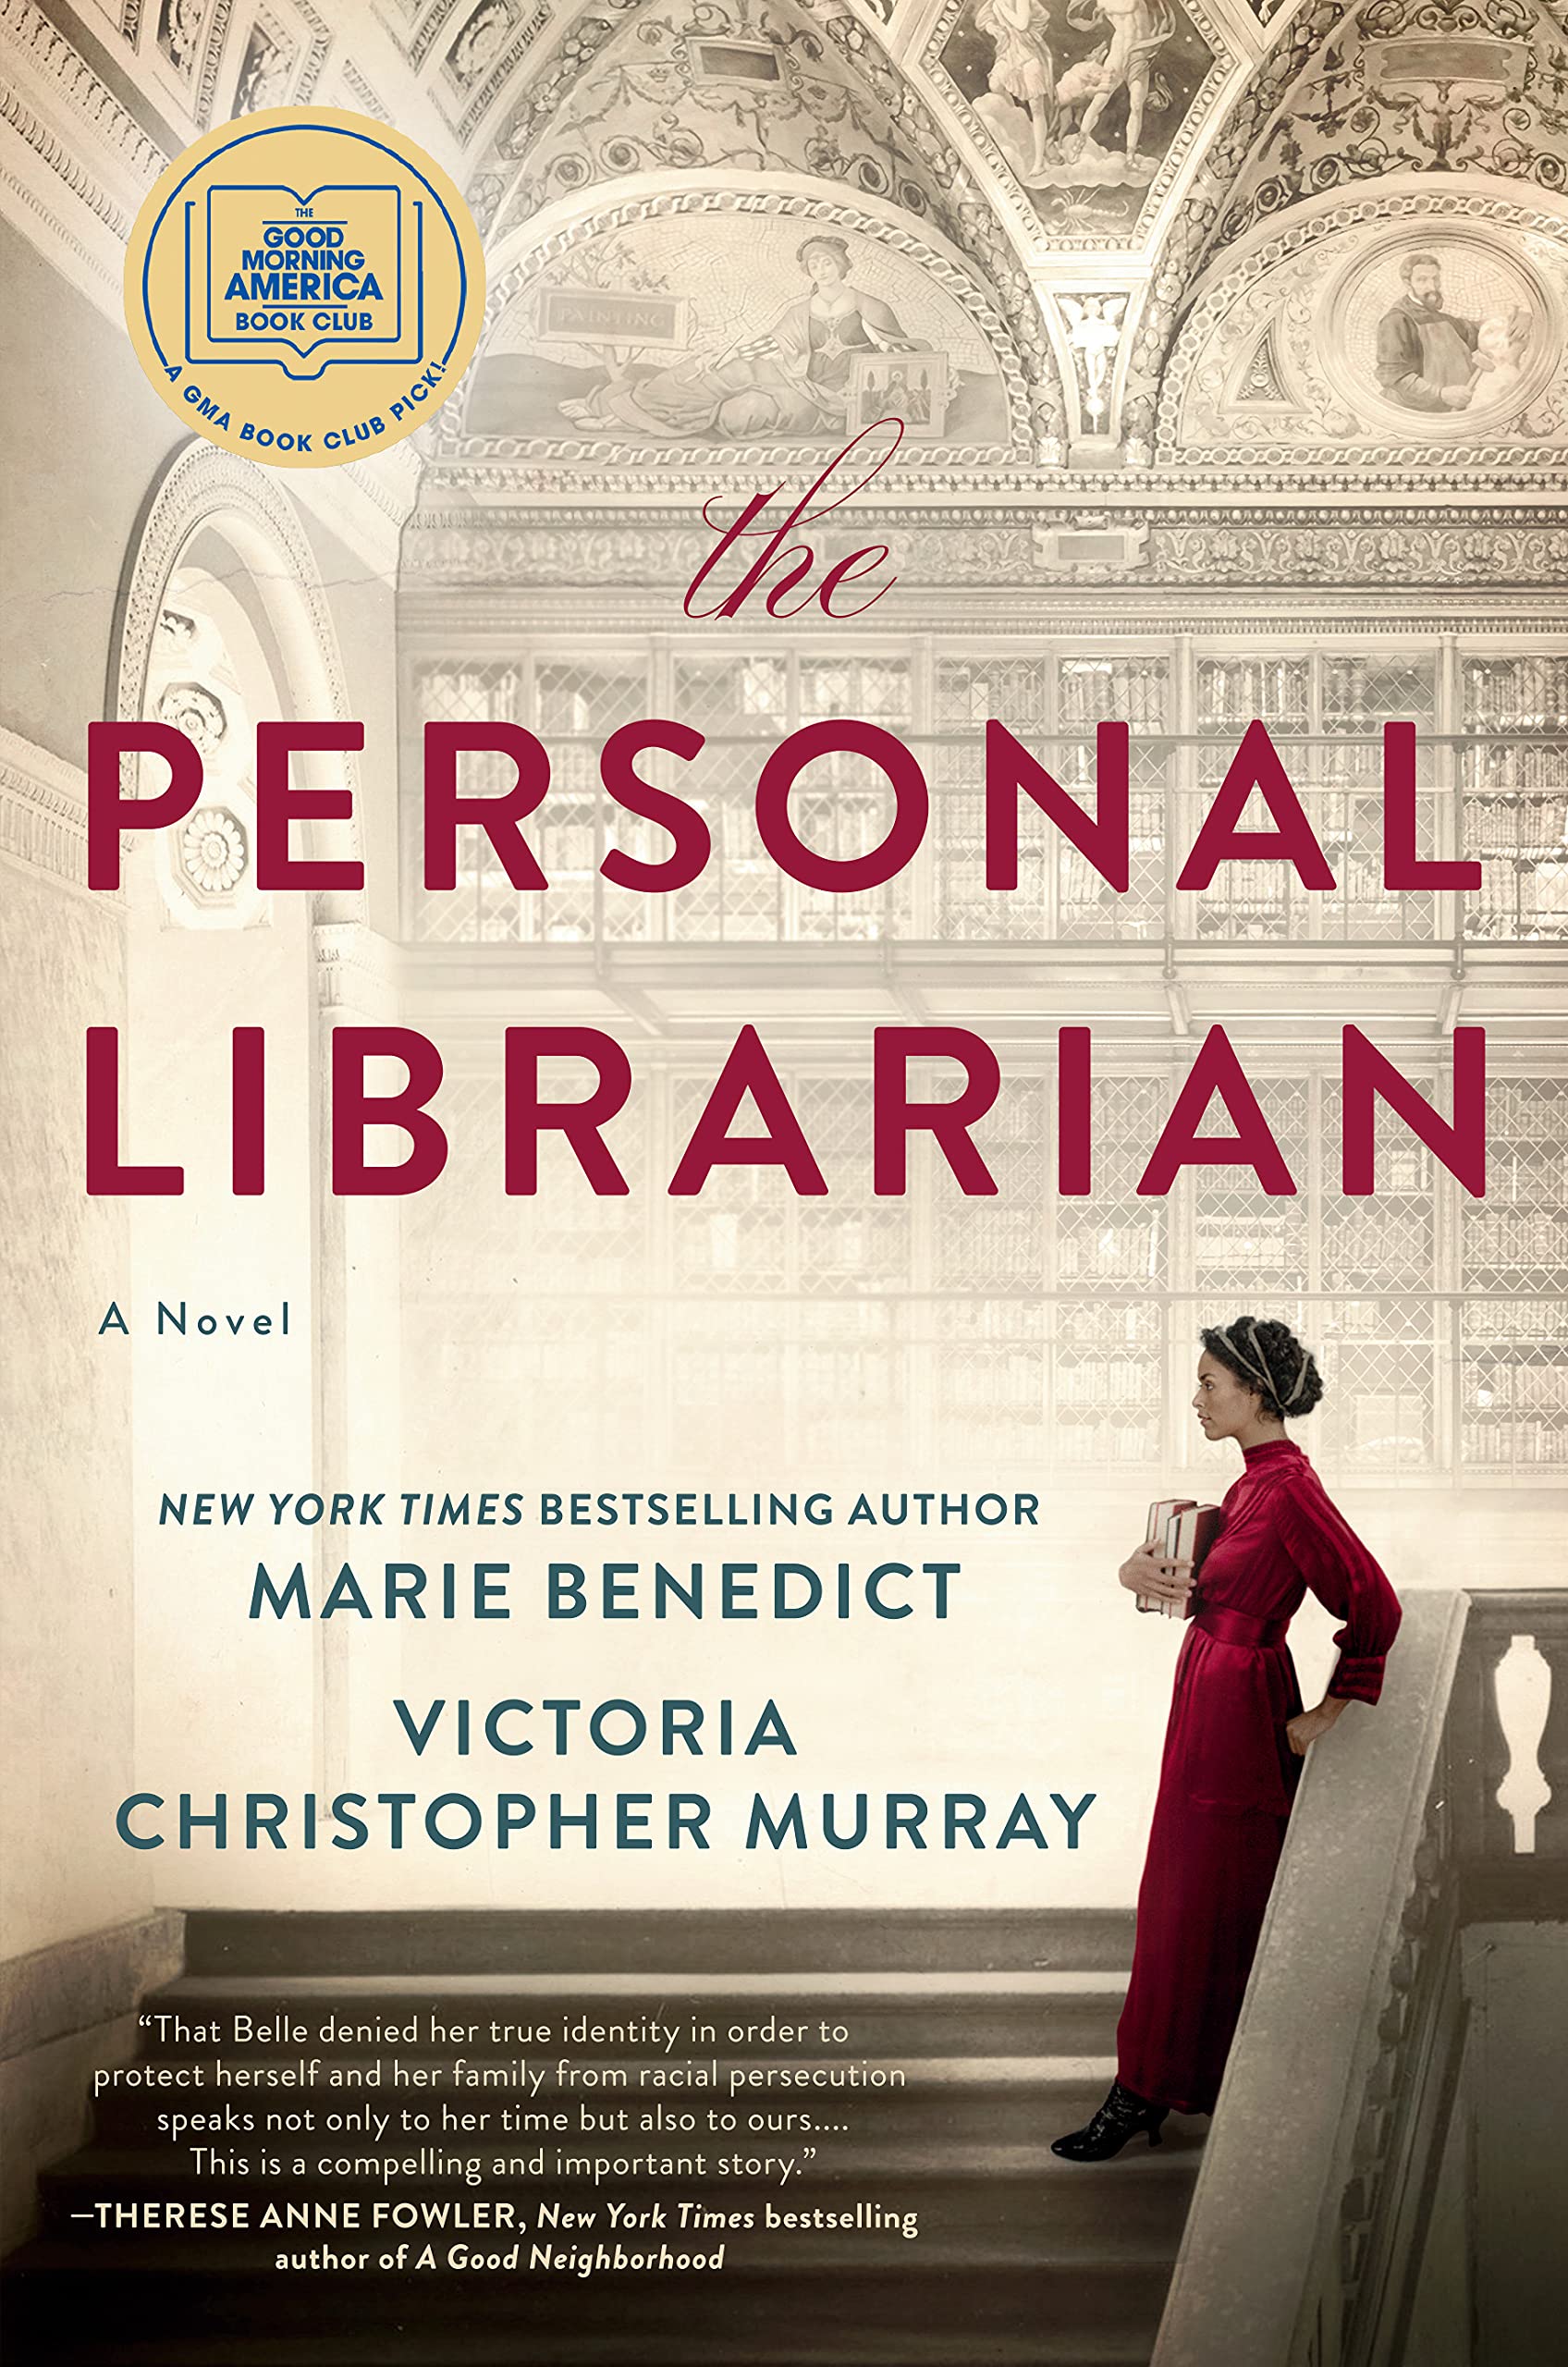 Book cover of The Personal Librarian.  Woman dressed in a long red dress standing on a stairway.